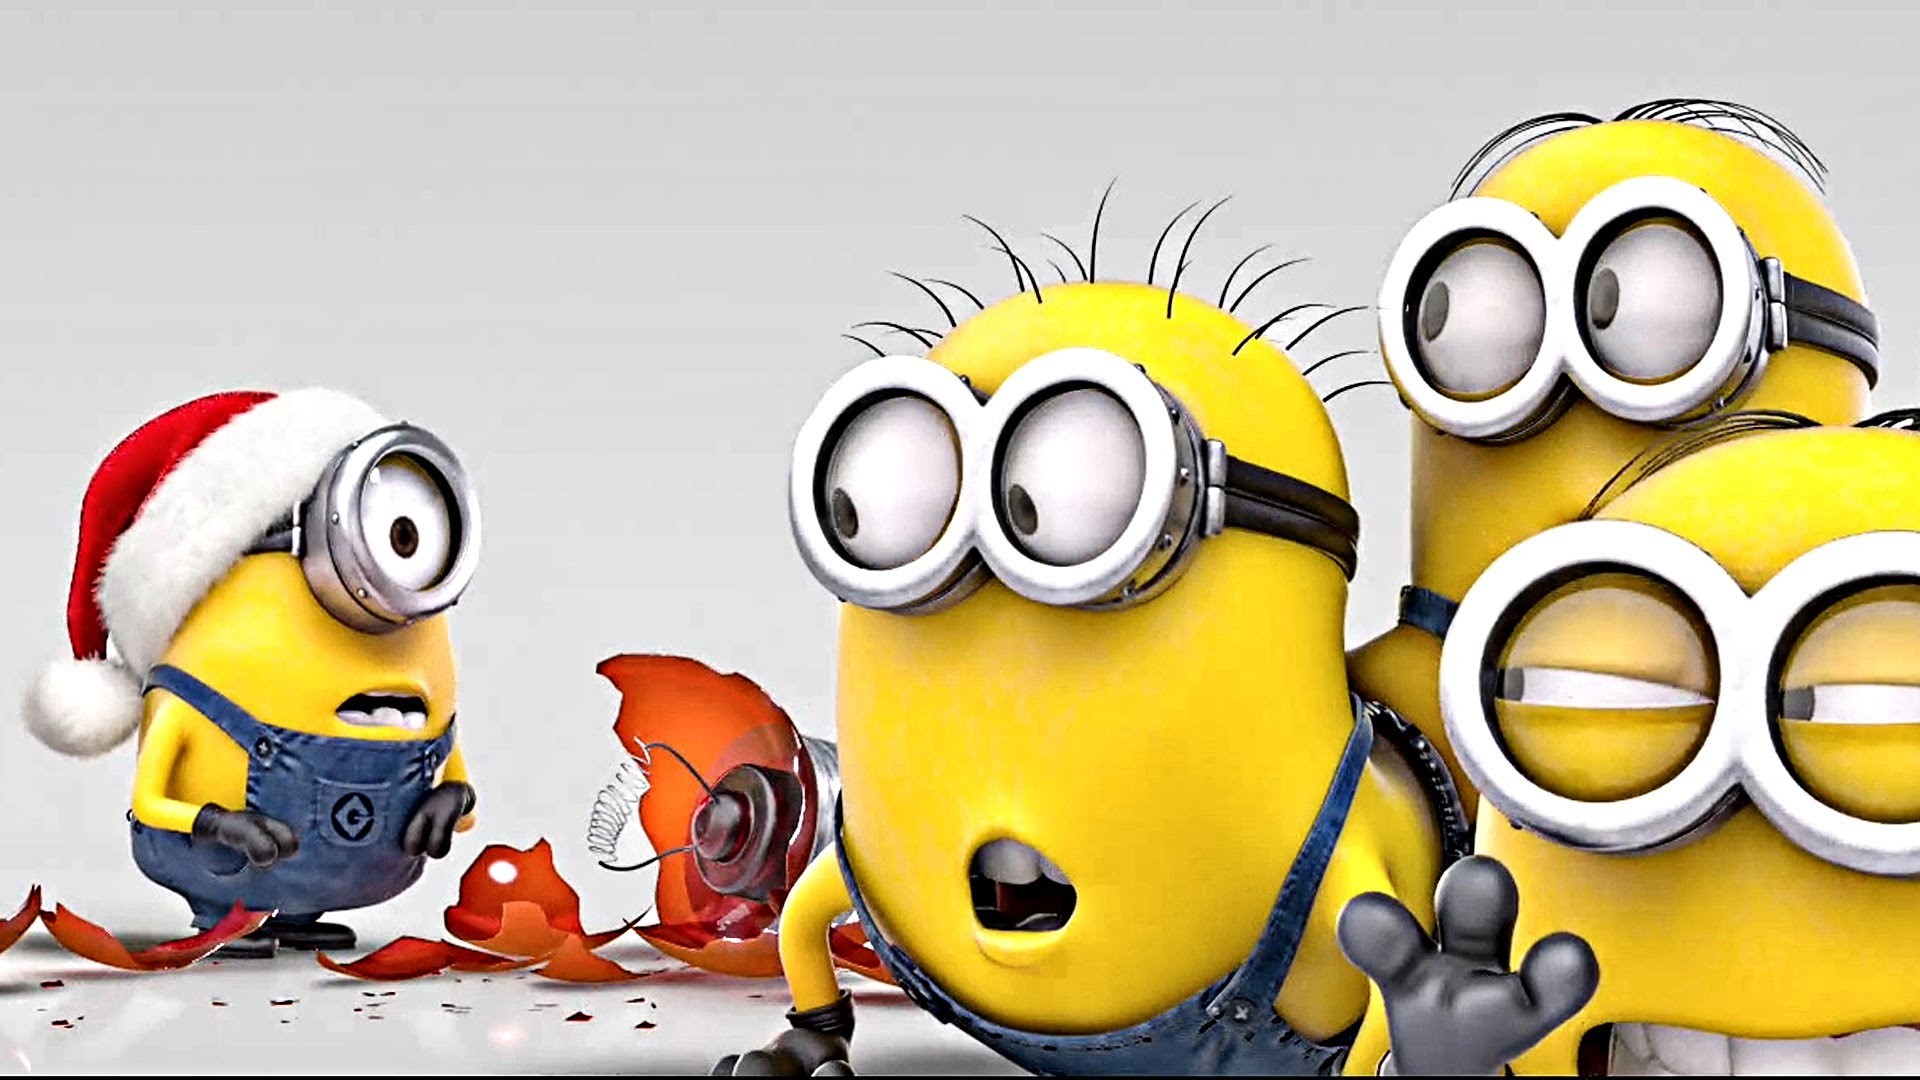 1920x1080 Displaying Images For - Minion Merry Christmas.